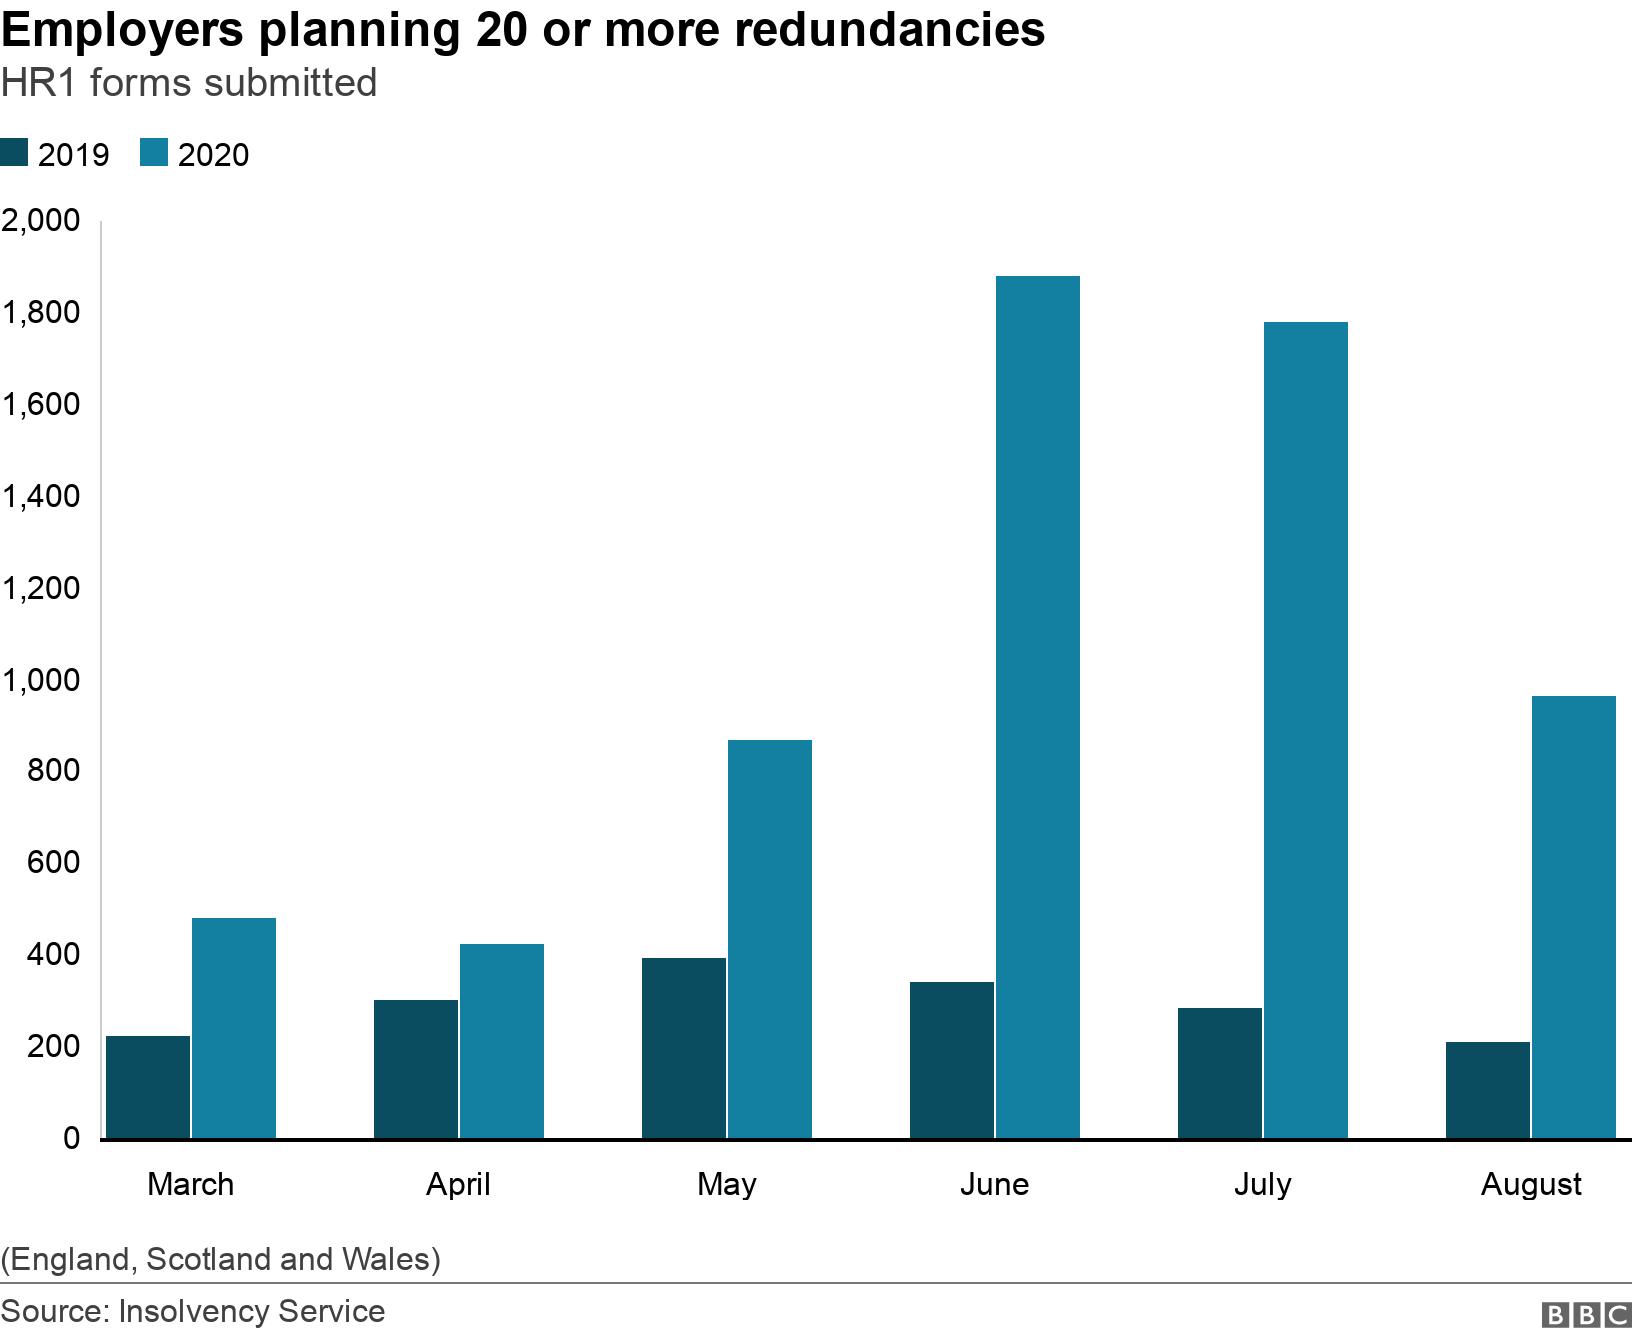 Employers planning 20 or more redundancies. HR1 forms submitted. Columns showing the number of employers planning 20 or more redundancies monthly from March to August 2020 with 2019 figures for comparison (England, Scotland and Wales).